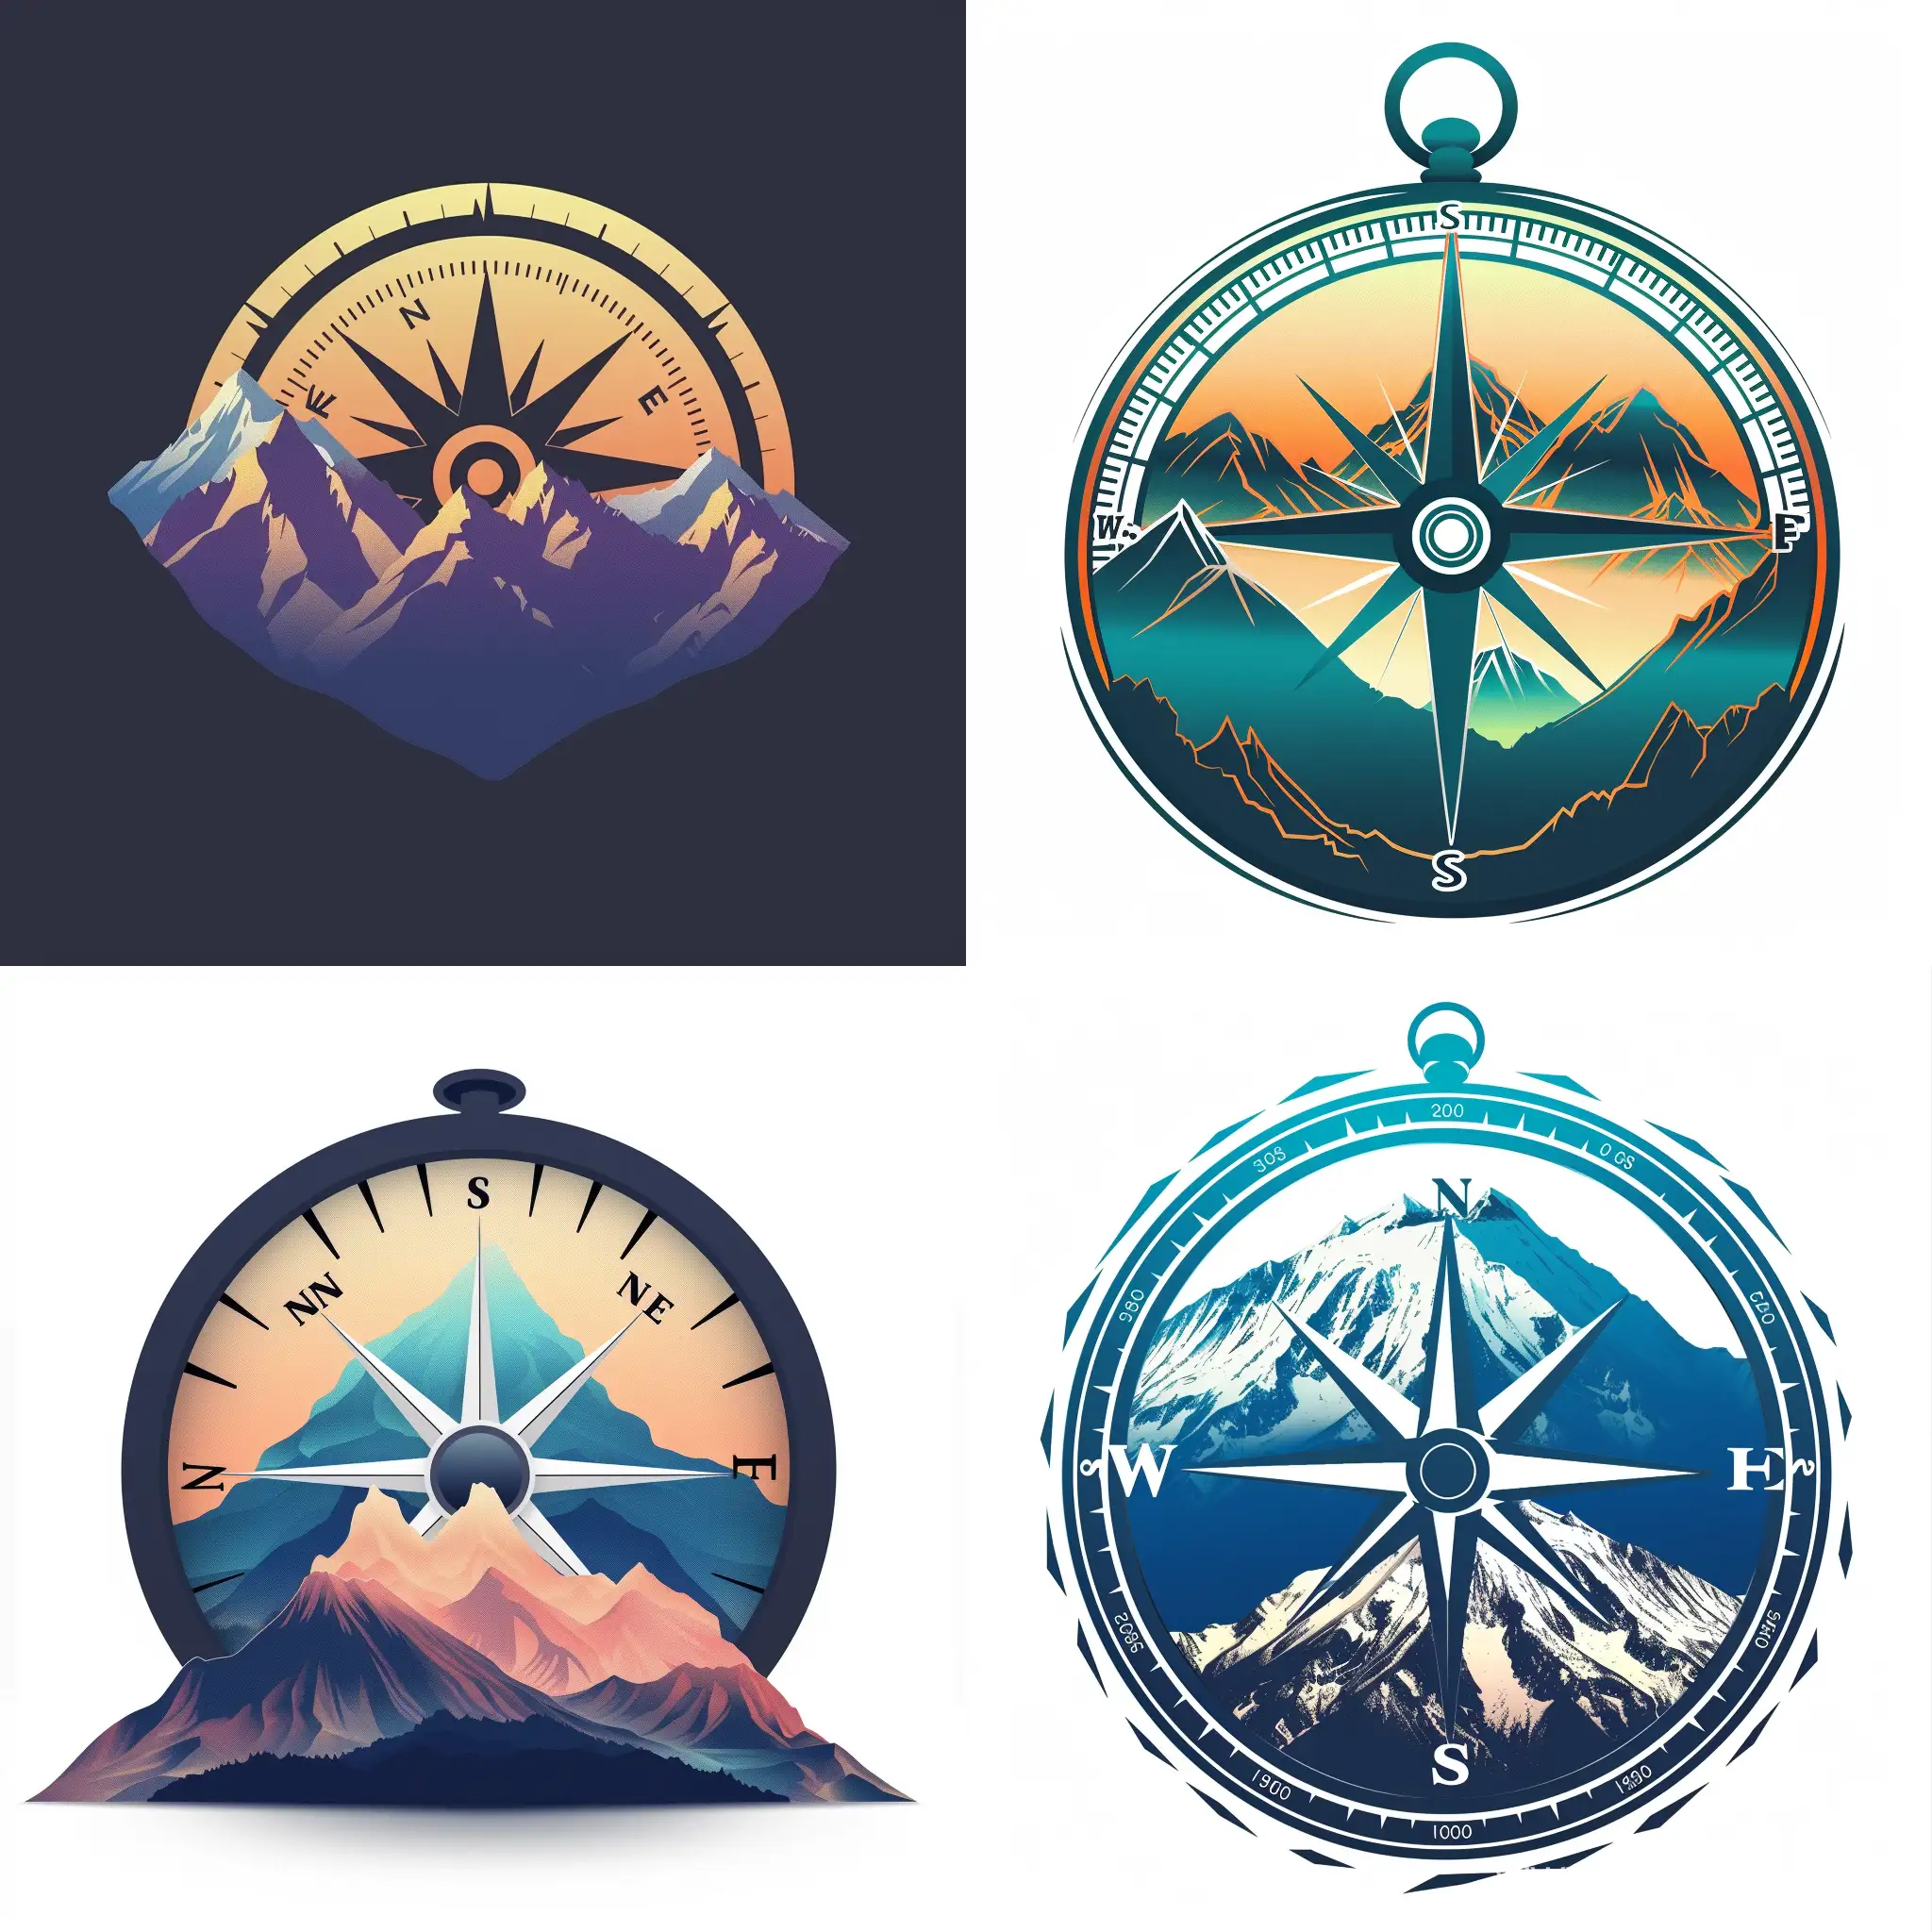 Keywords: Mountains, Compass, Growth Style: Silhouettes of iconic Indonesian mountains integrated with a compass, symbolizing growth and exploration. Media: Utilize gradients to capture the majestic feel of mountains.